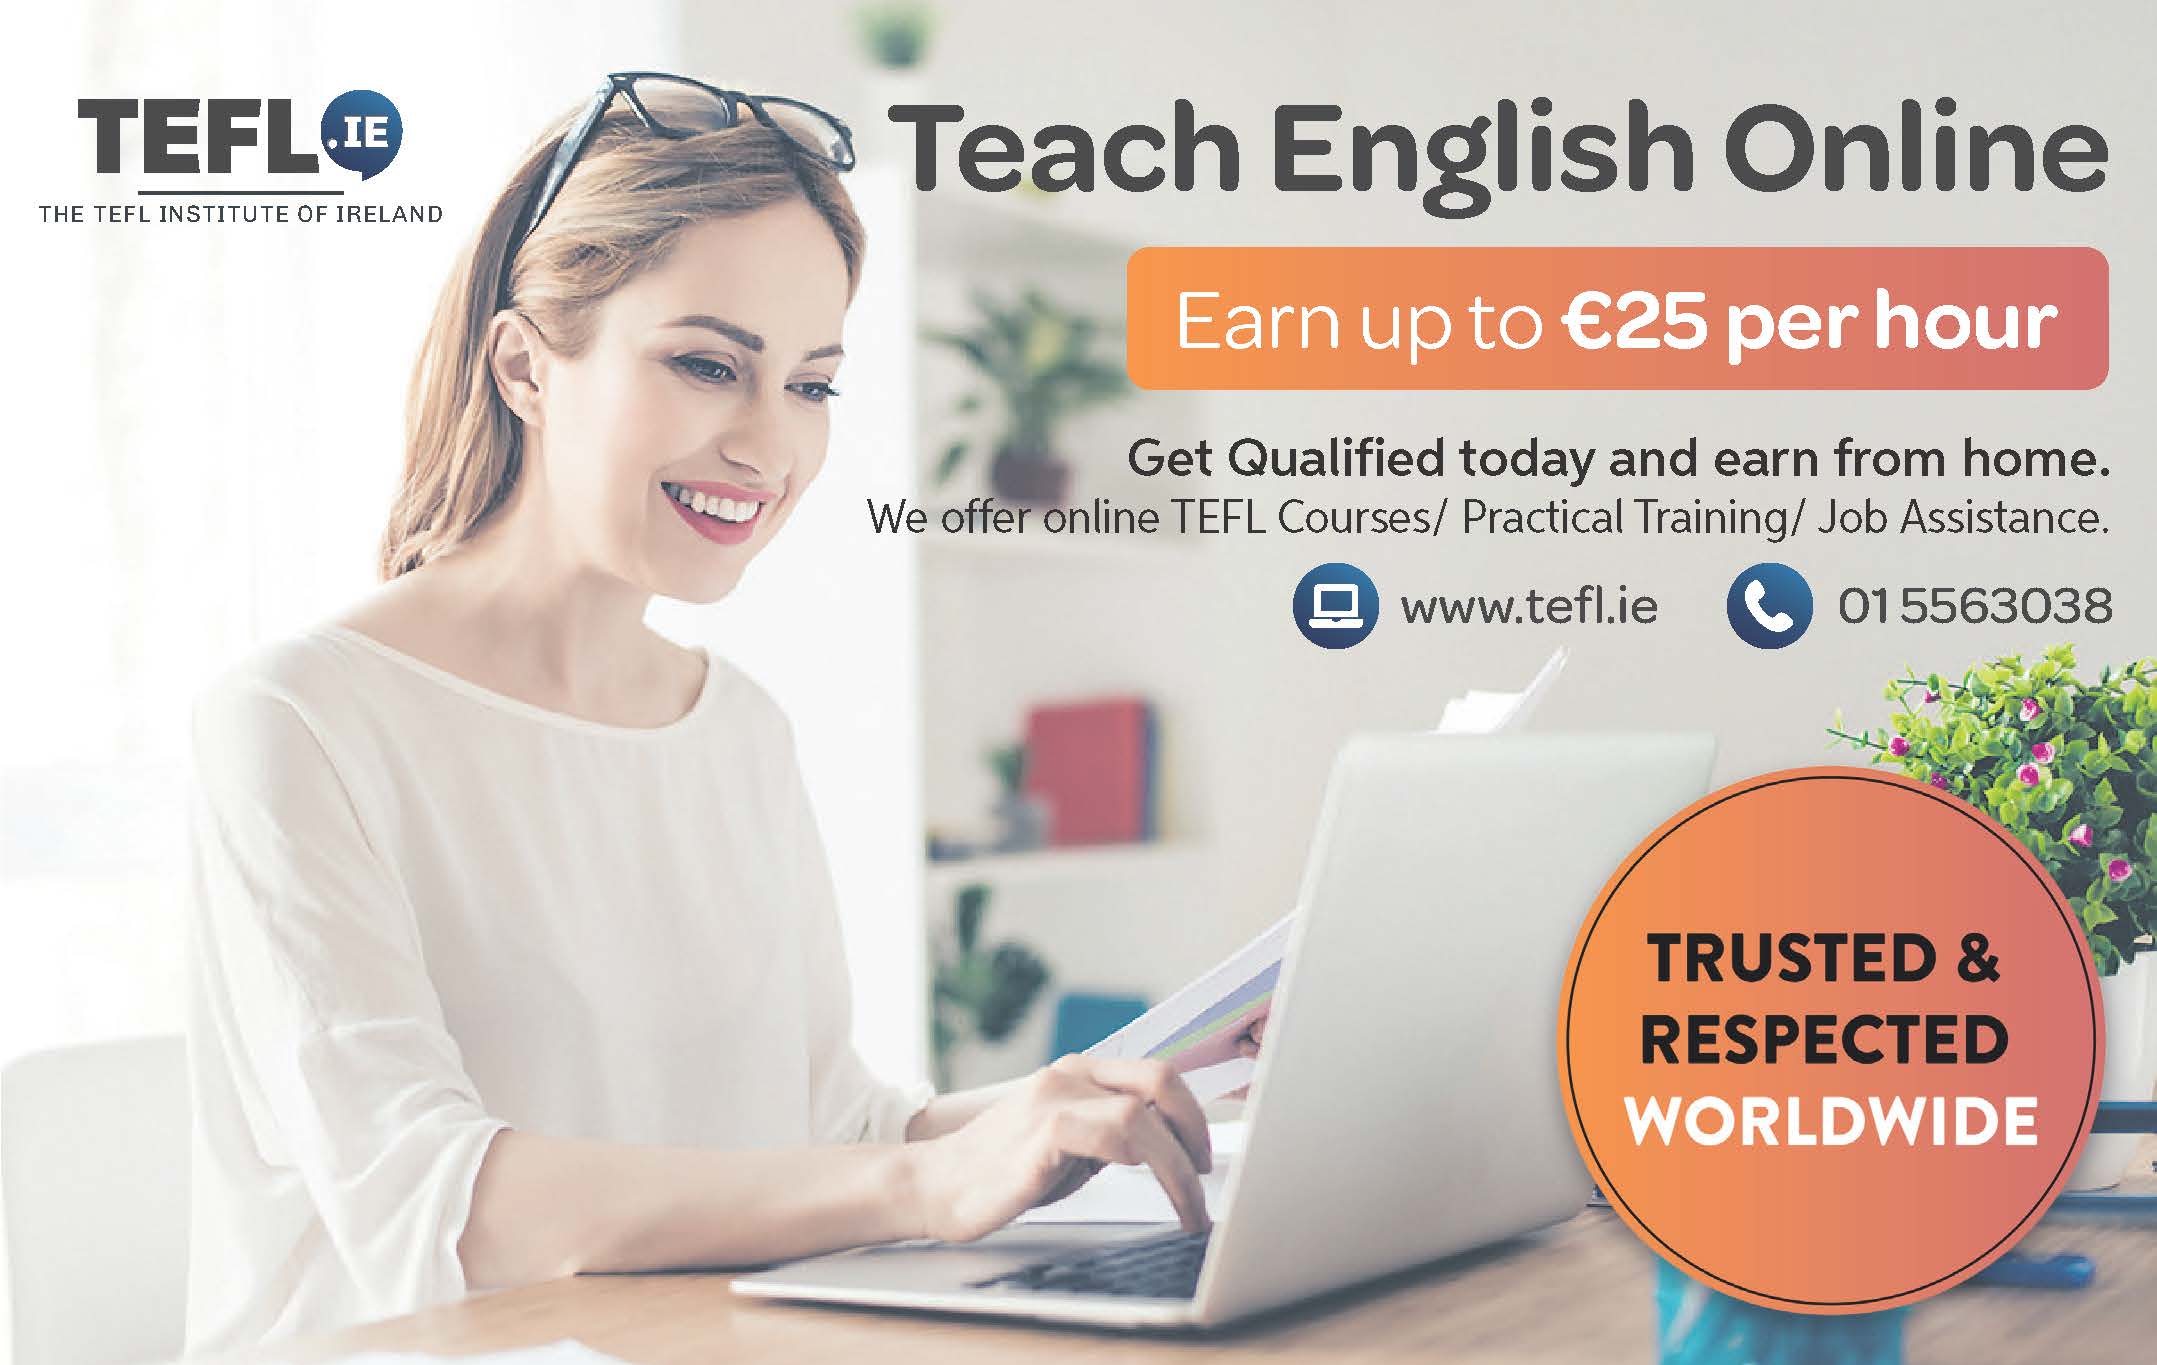 Earn up to €25 per hour by teaching English online